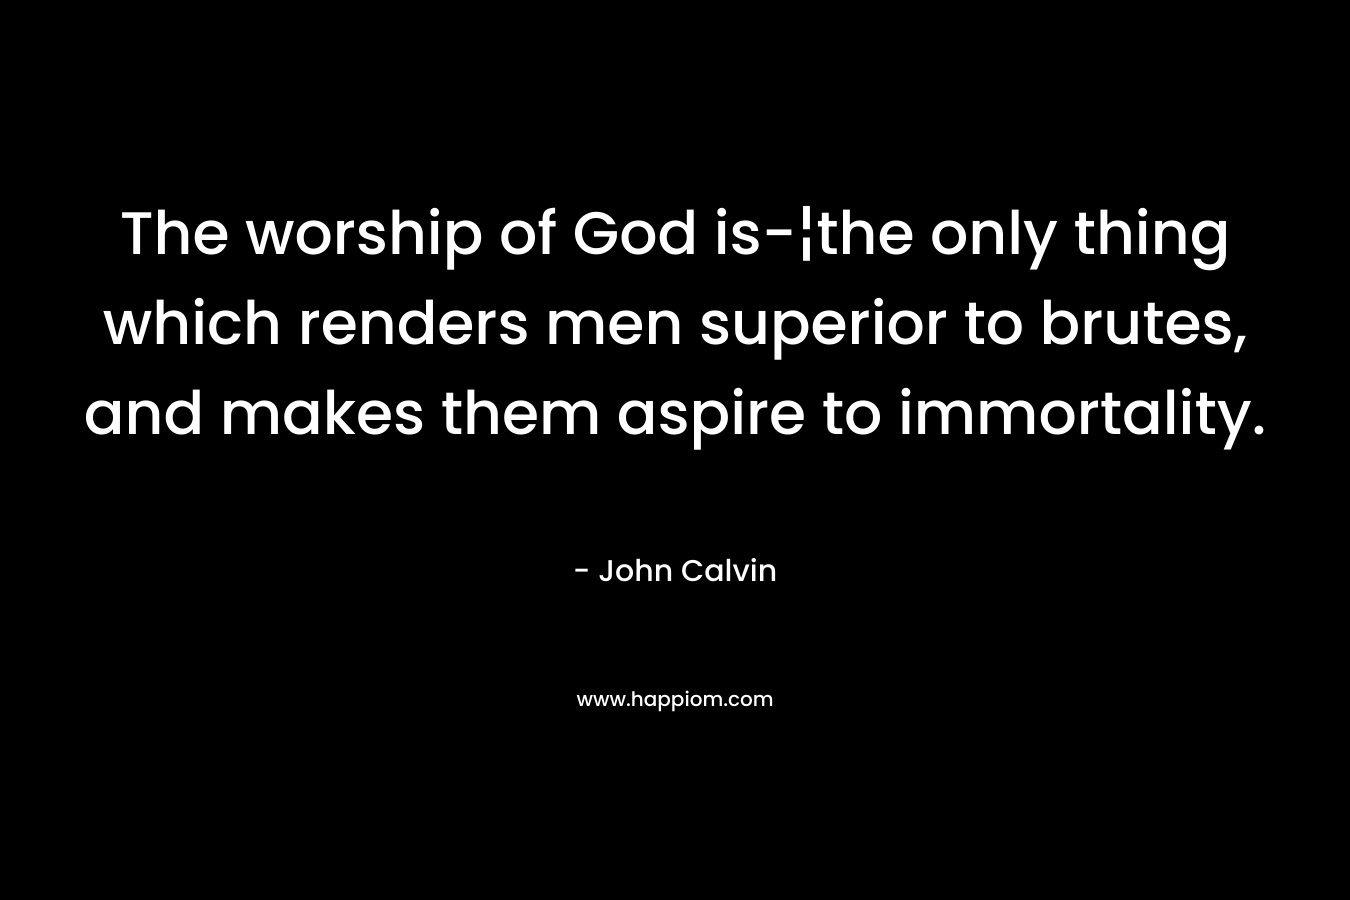 The worship of God is-¦the only thing which renders men superior to brutes, and makes them aspire to immortality.